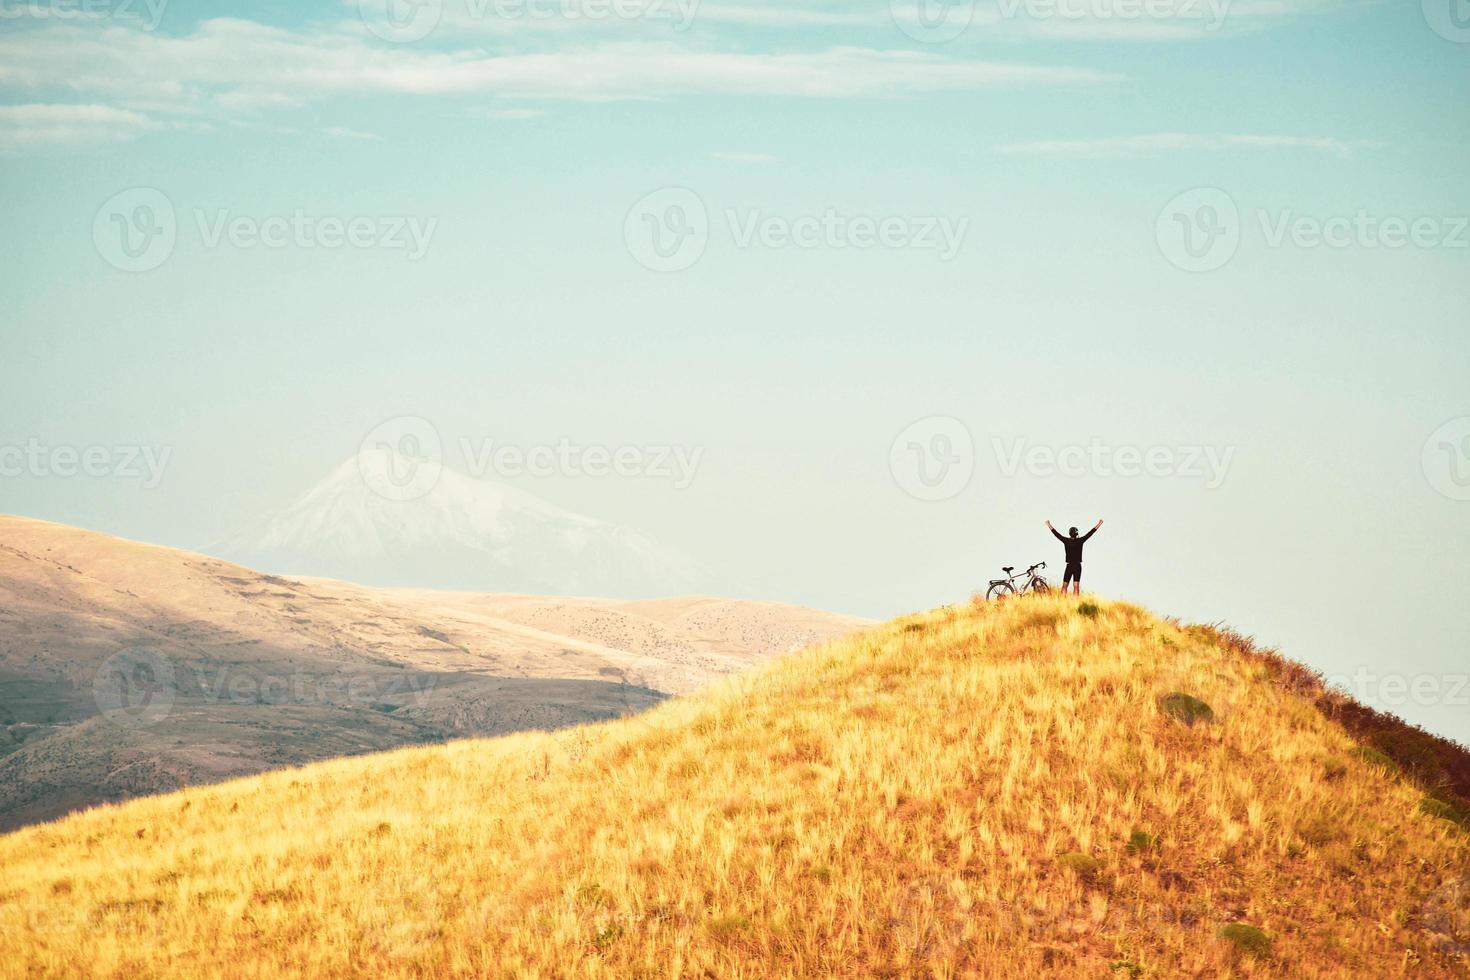 Top view inspirational excited joyful caucasian male cyclist stand on hilltop by red touring bicycle excited enjoy Ararat mountains background. Solo cycling adventure lifetime photo